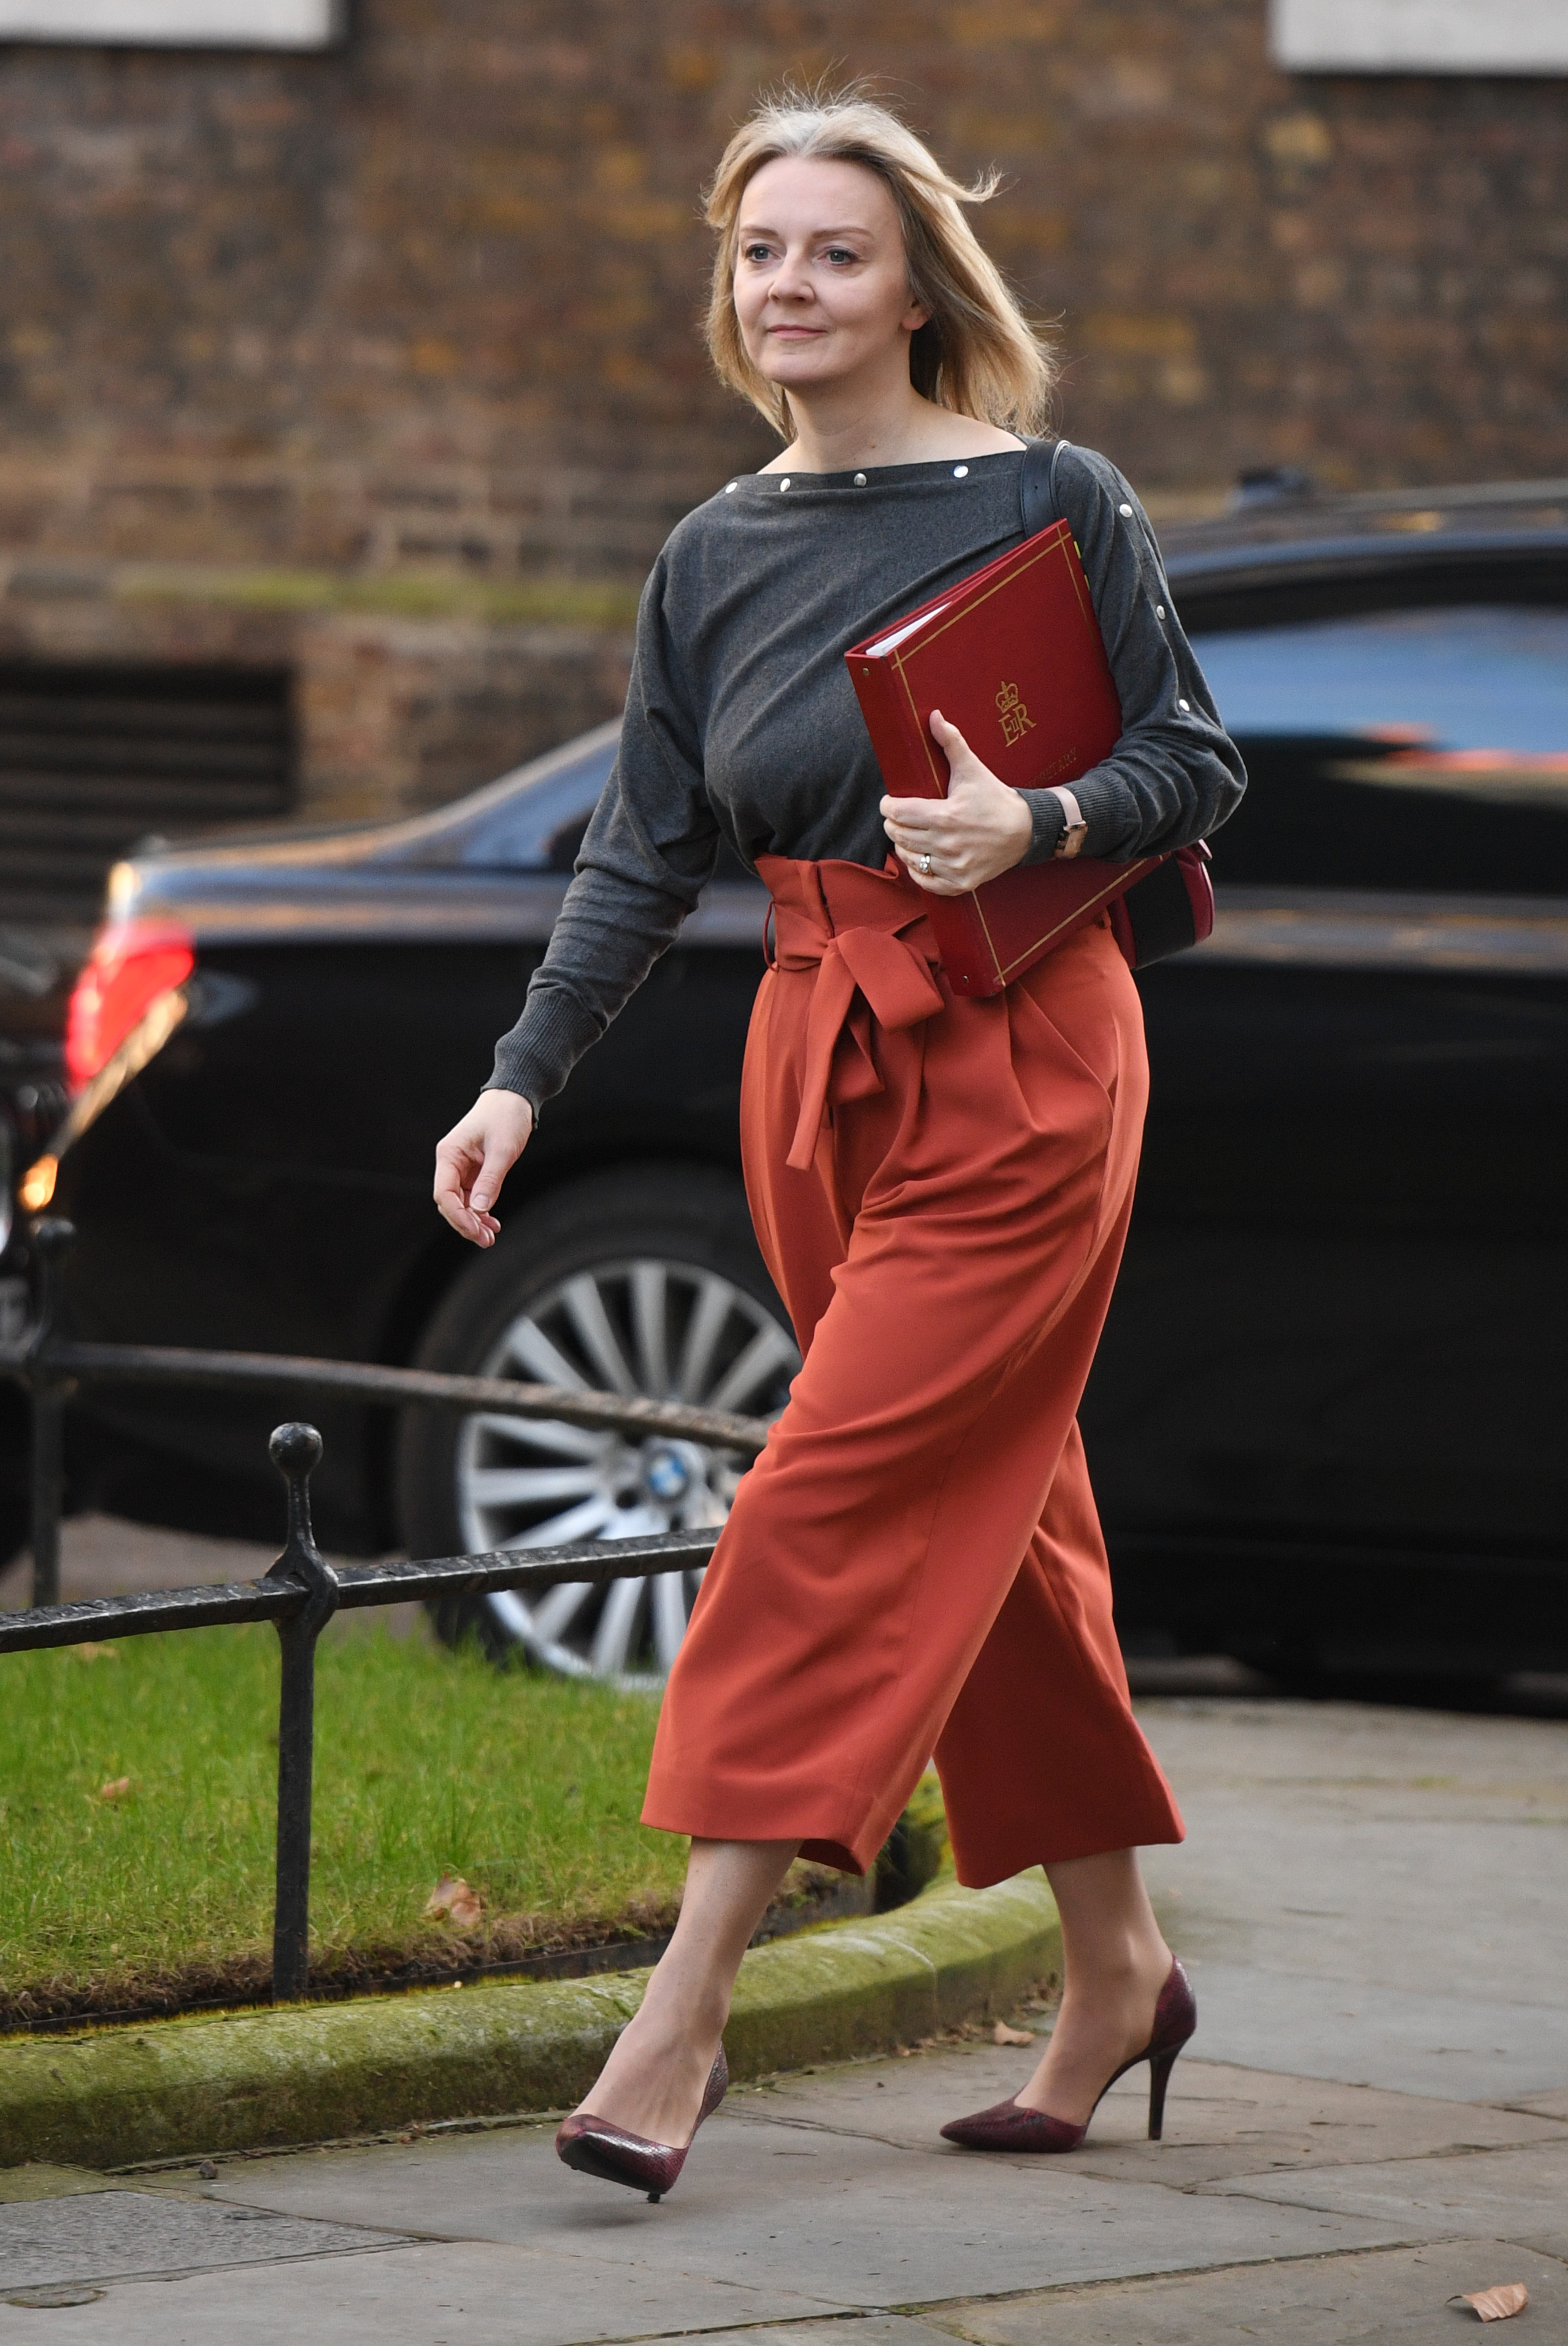 Then Chief Secretary to the Treasury Liz Truss arrives in Downing Street, London, for a cabinet meeting, in 2019